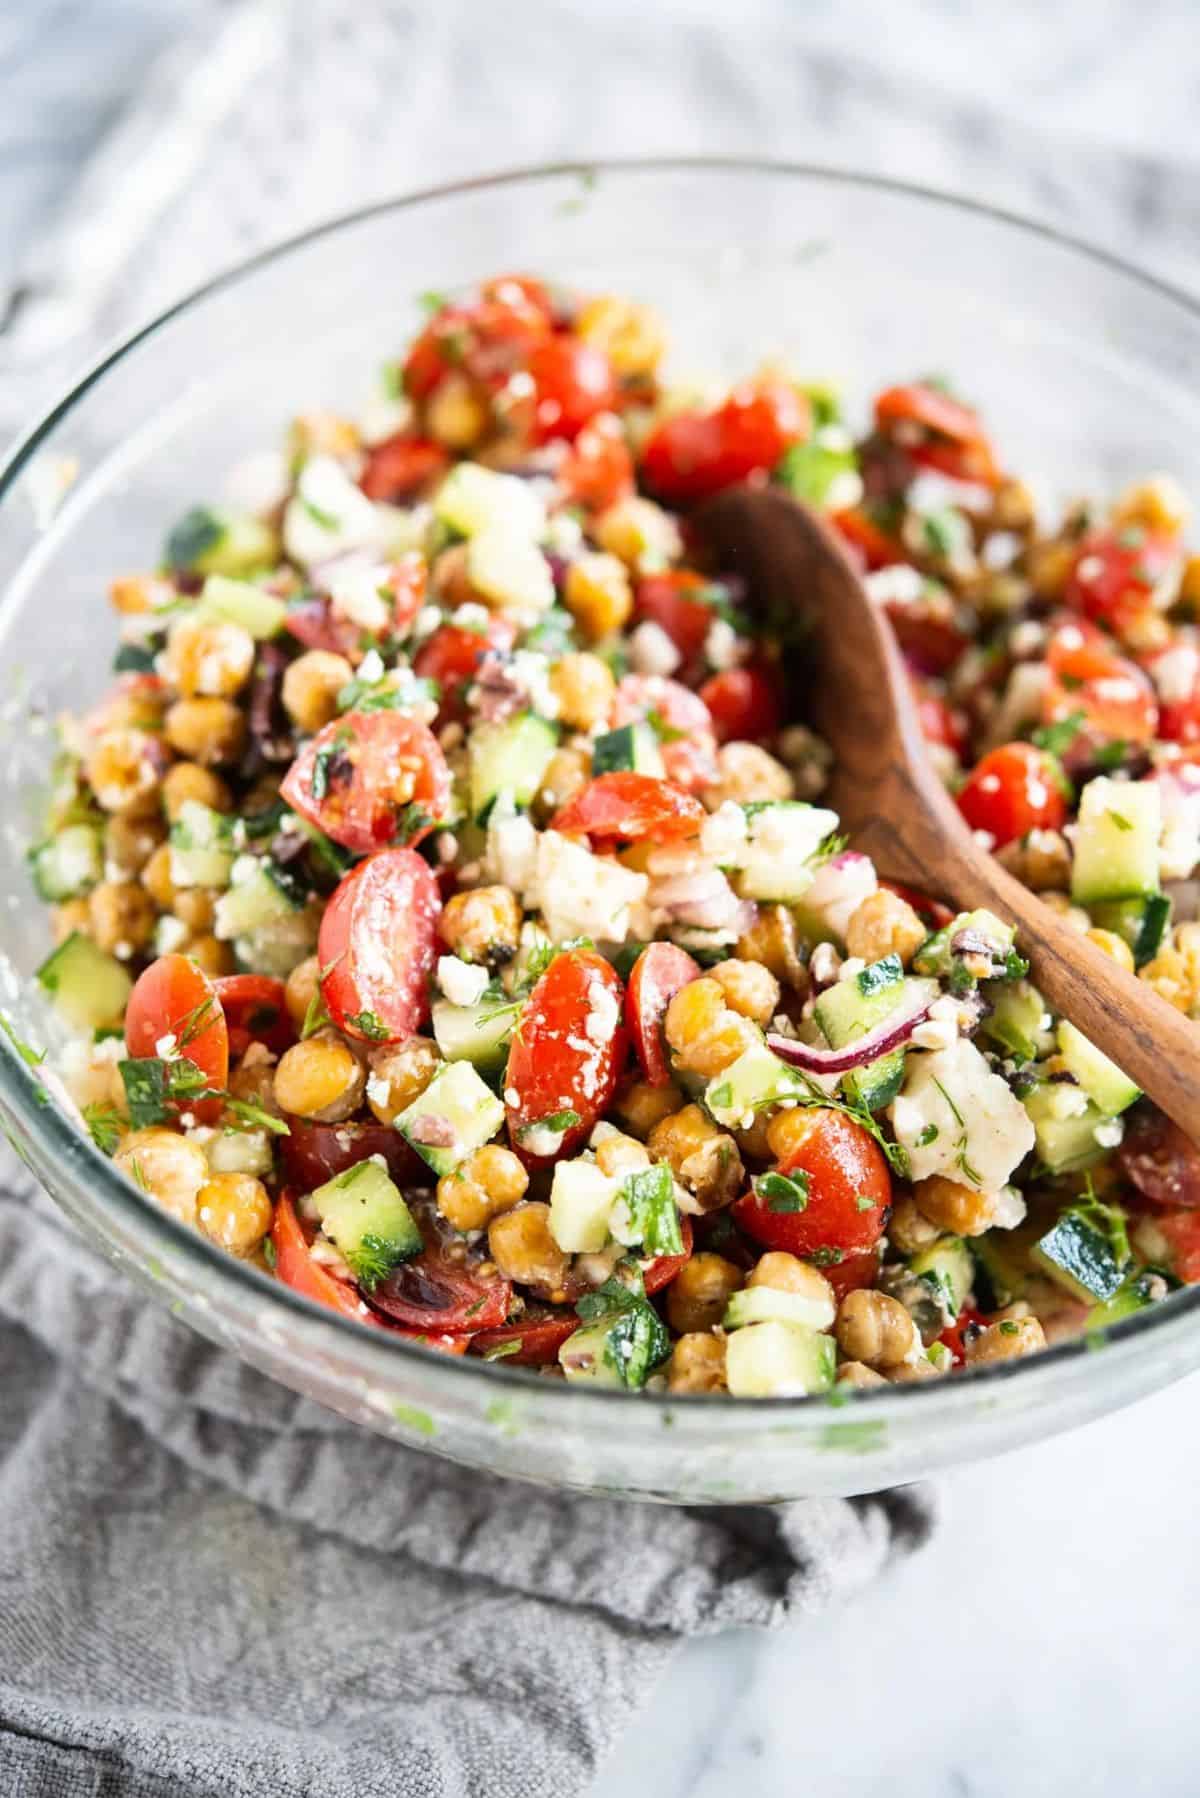 Healthy Mediterranean Chickpea Salad in a glass bowl with a wooden spatula.